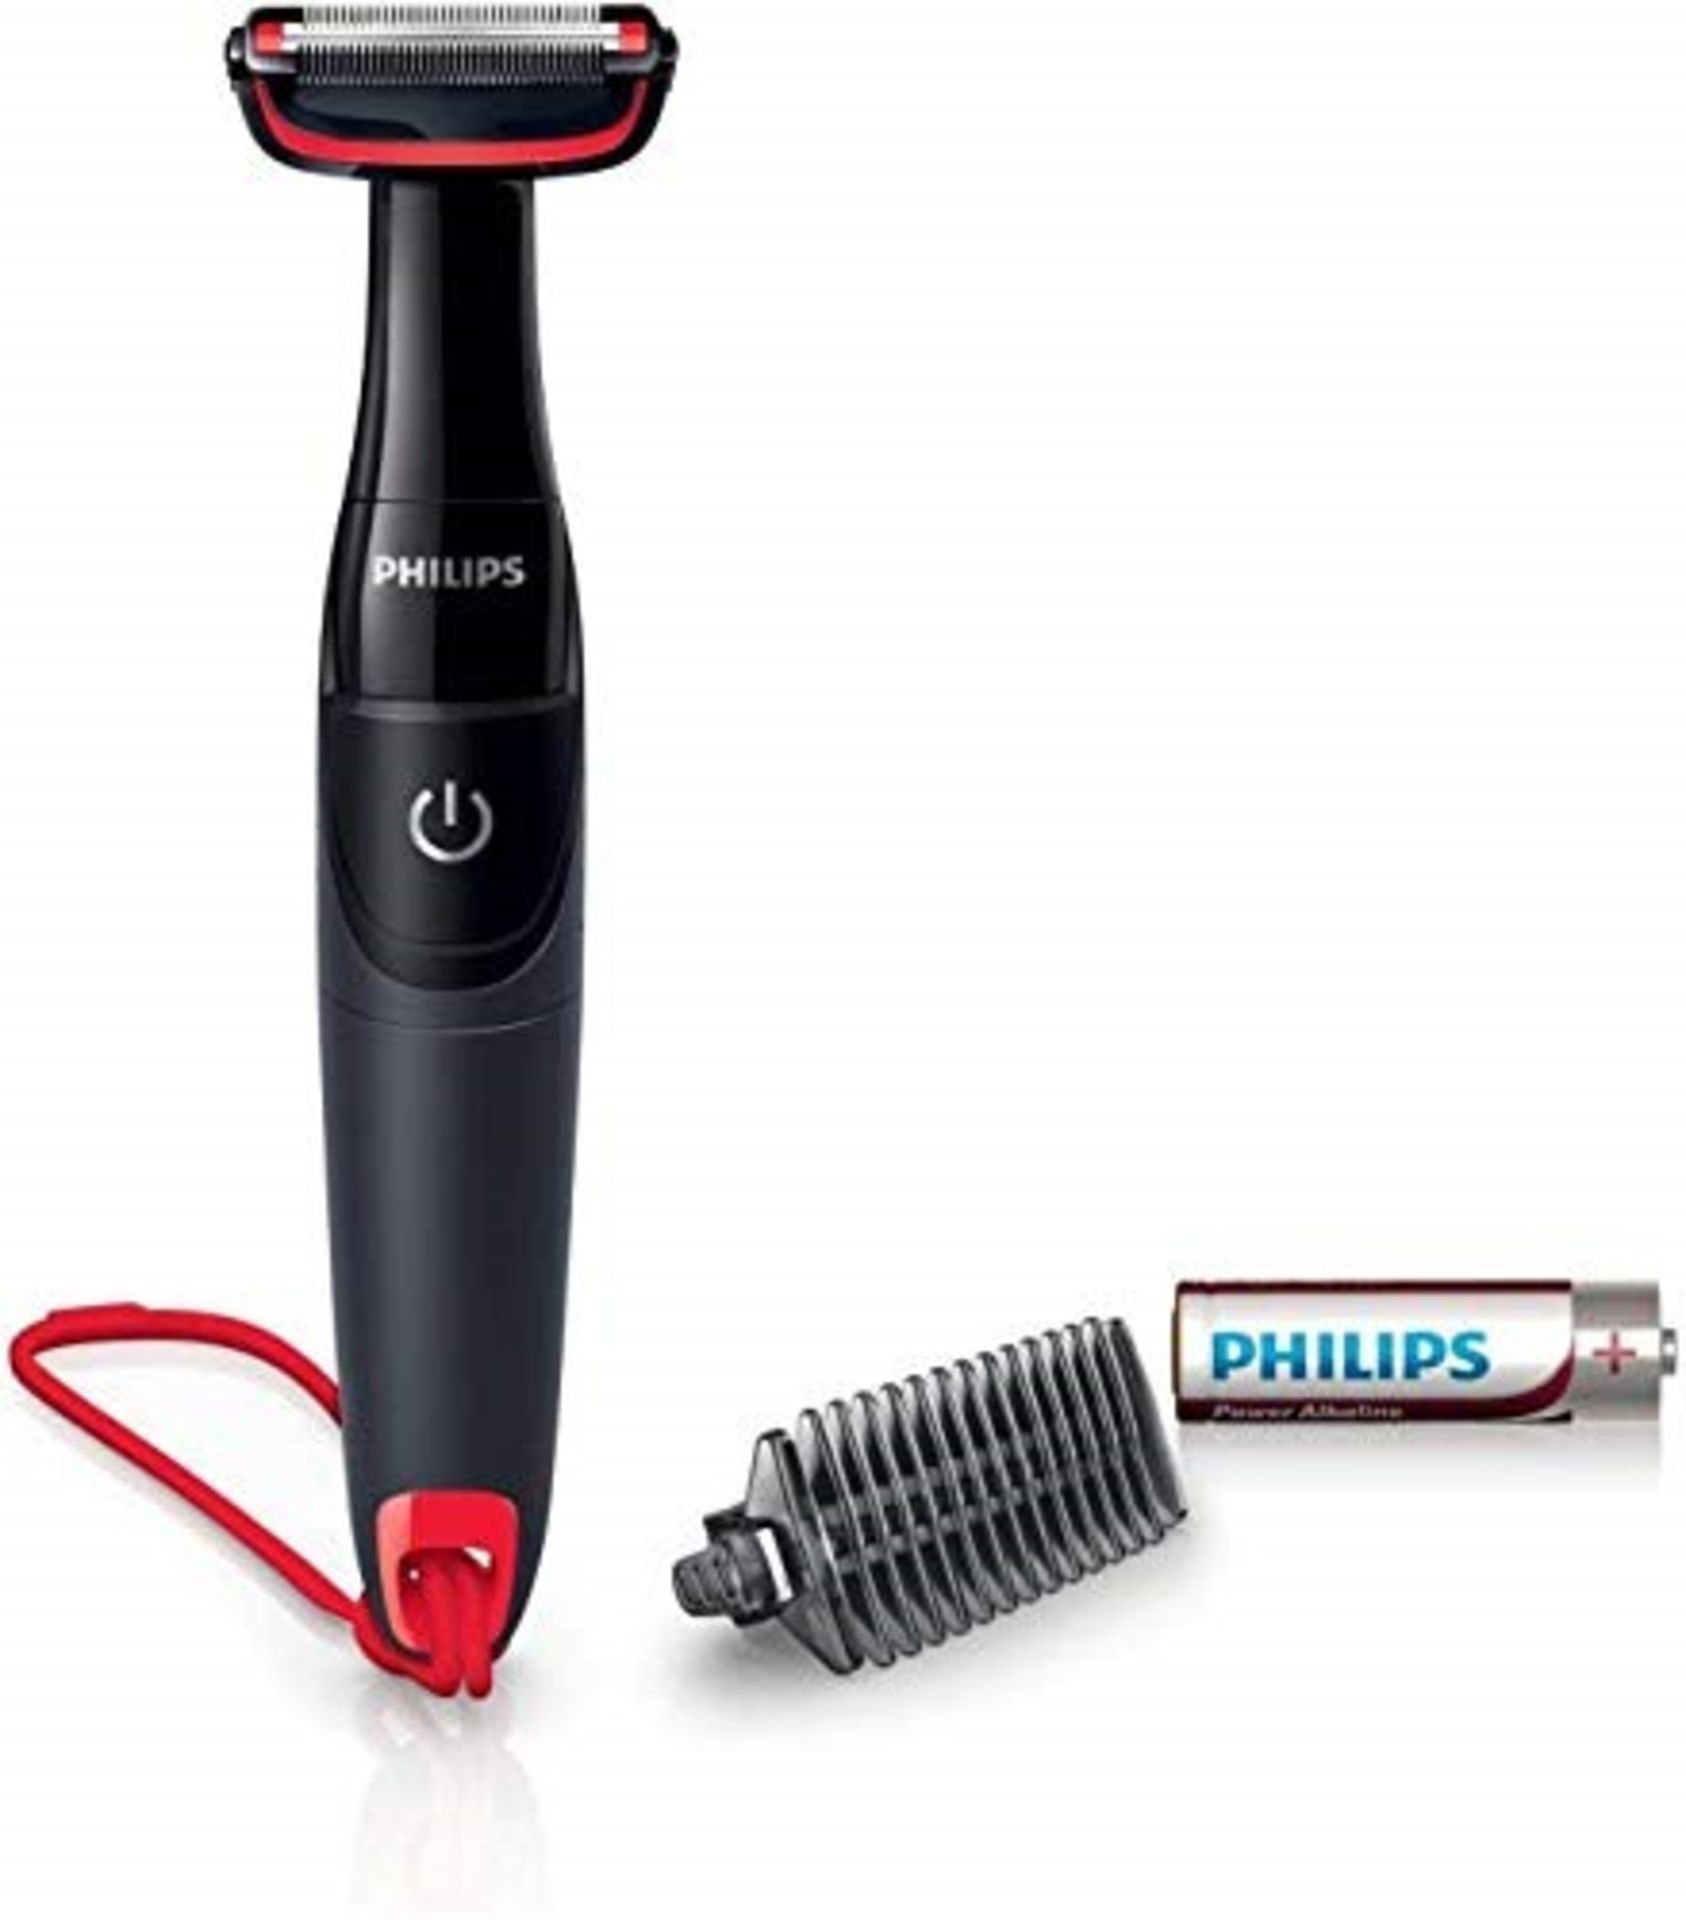 Philips Series 1000 Body Groomer with Skin Protector Guards - BG105/10